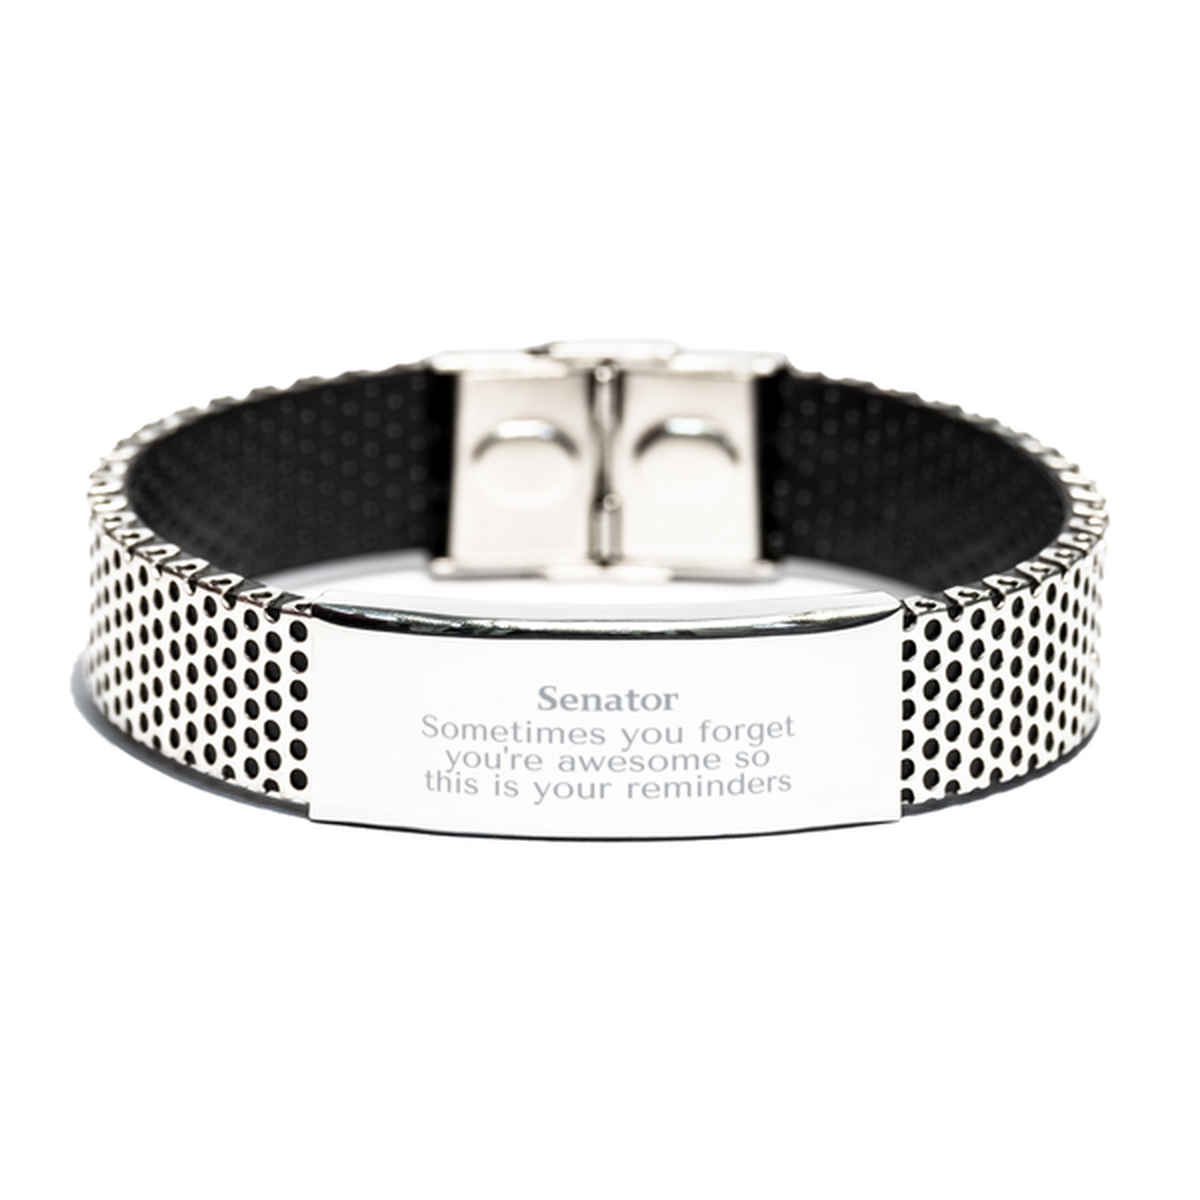 Sentimental Senator Stainless Steel Bracelet, Senator Sometimes you forget you're awesome so this is your reminders, Graduation Christmas Birthday Gifts for Senator, Men, Women, Coworkers